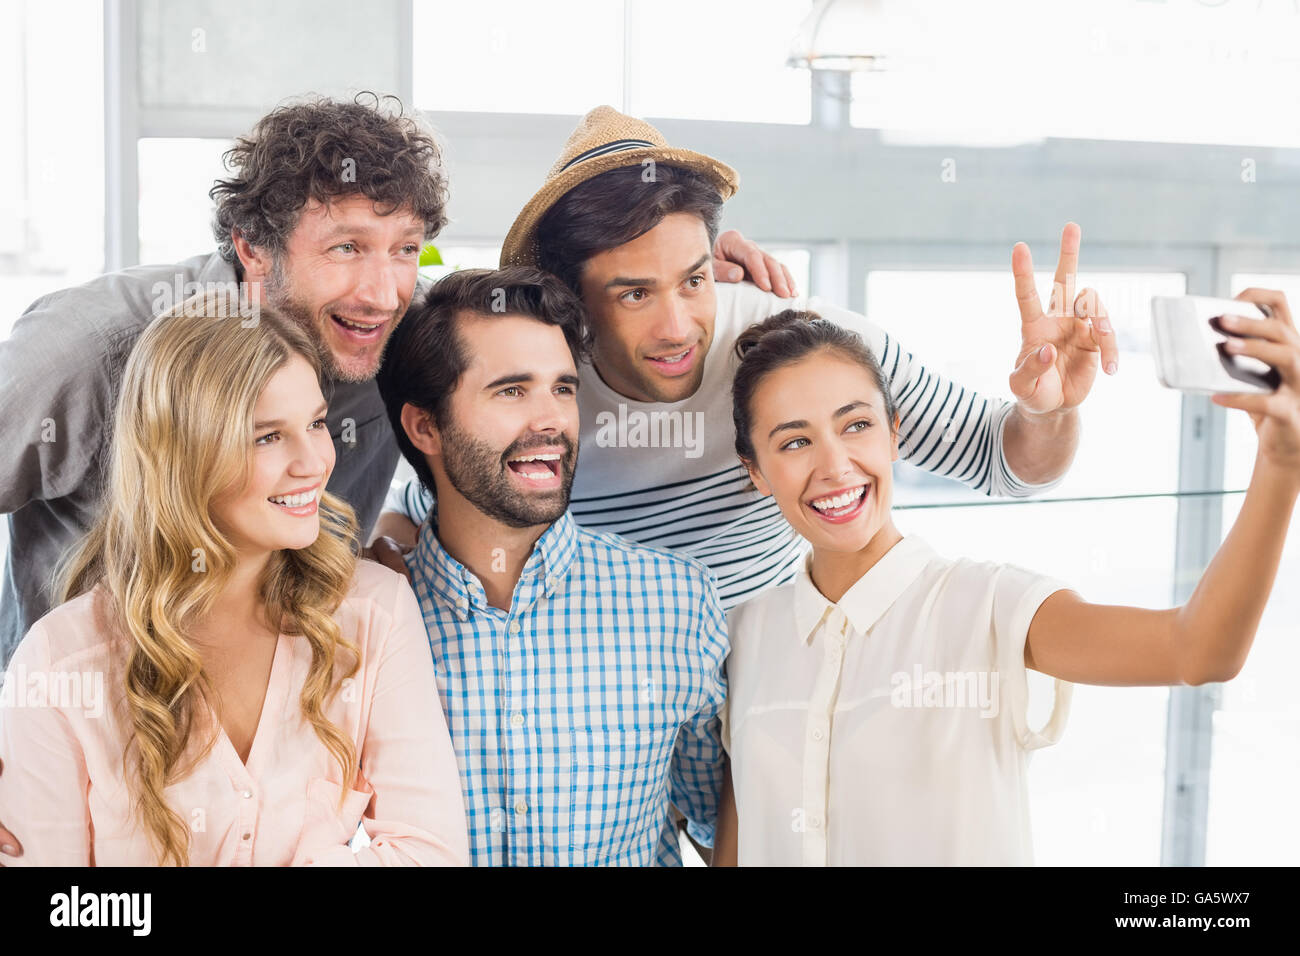 Group of friends taking a selfie Stock Photo